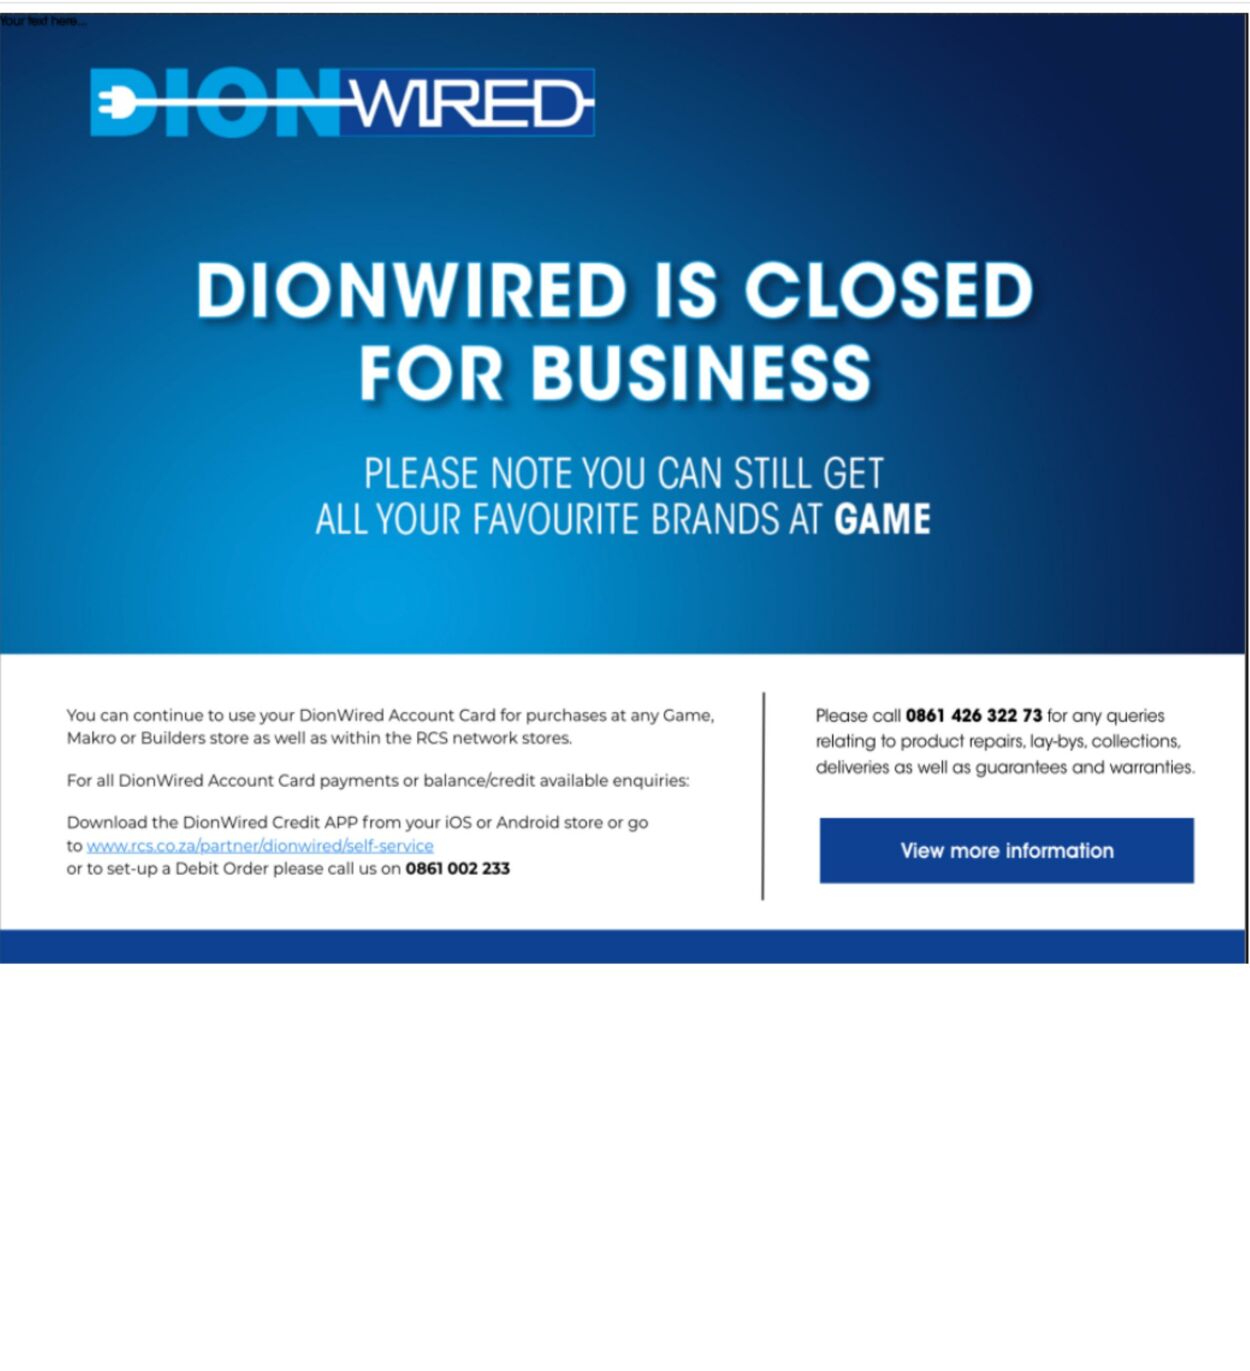 Special Dion Wired 13.04.2022-30.04.2022